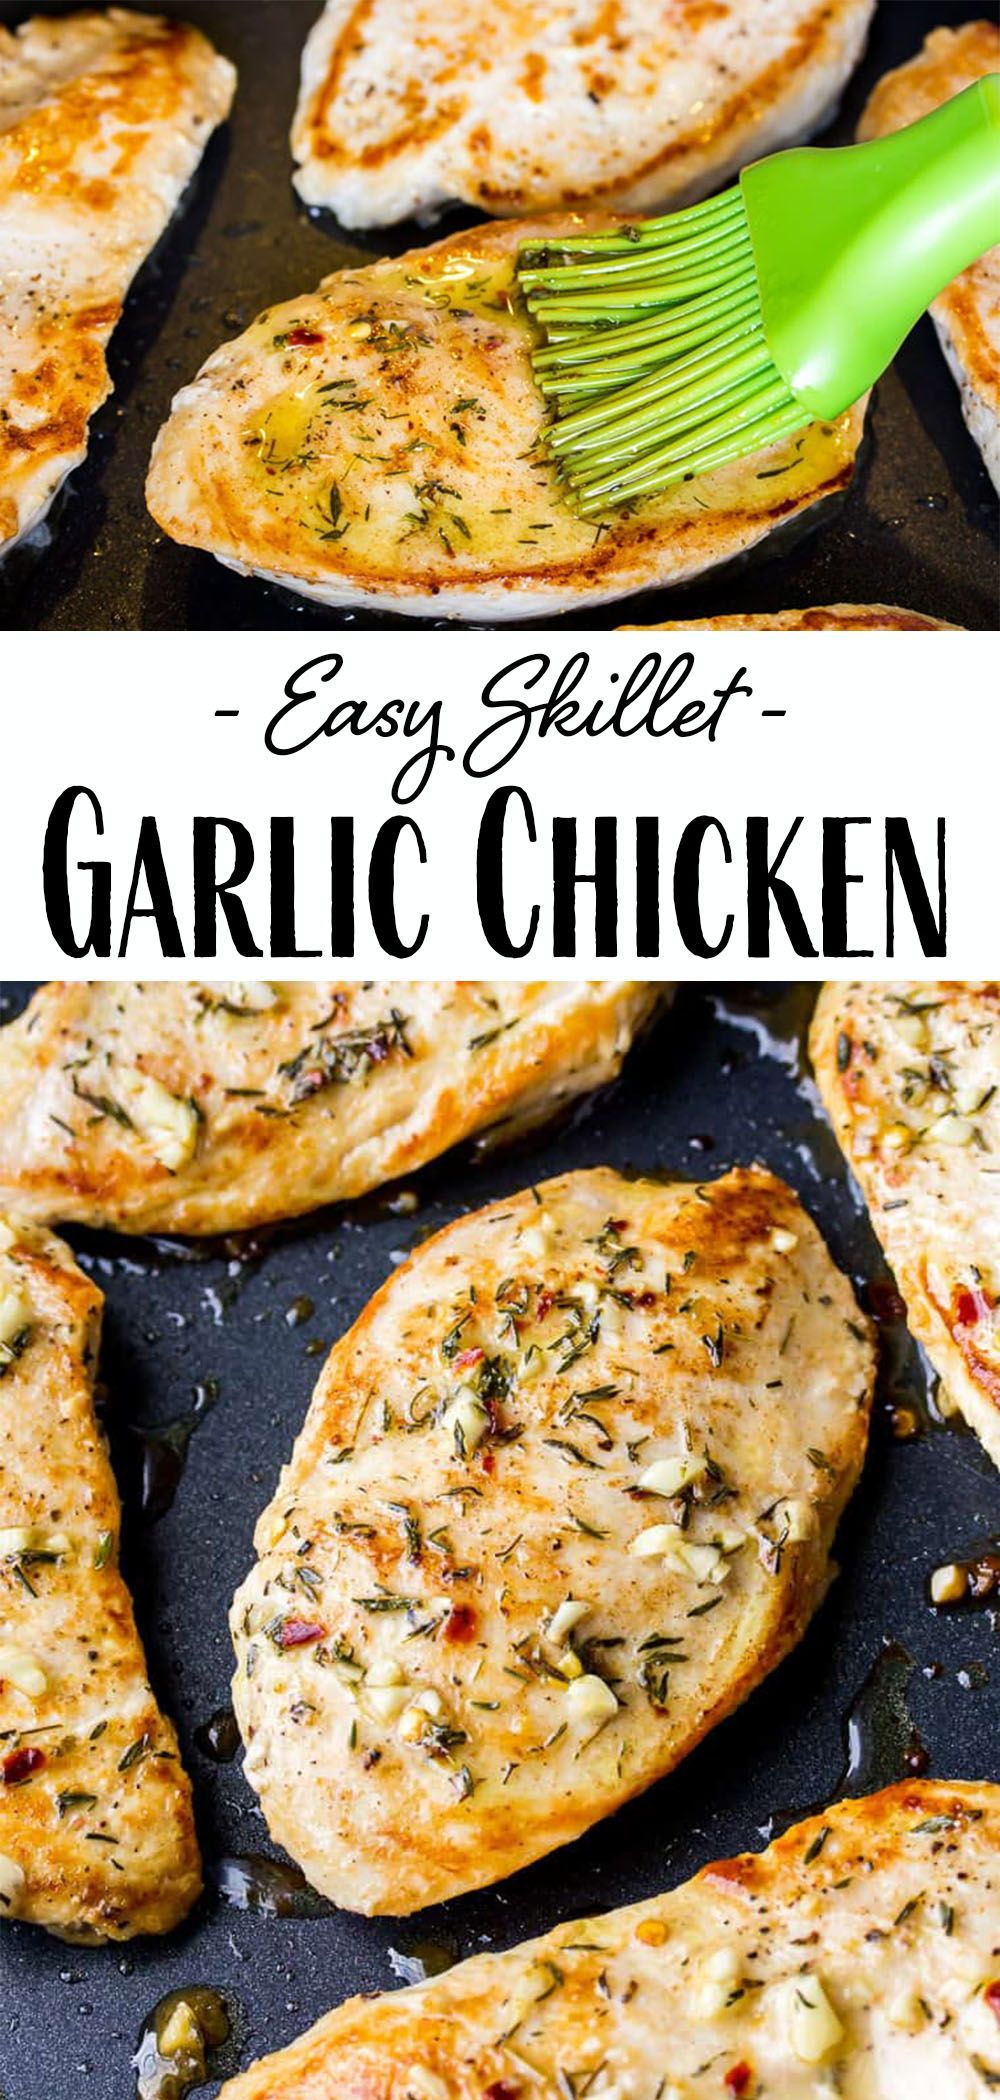 Easy Recipes, Travel & Lifestyle Blog - Delicious Little Bites -   25 dinner recipes for family main dishes chicken breasts ideas